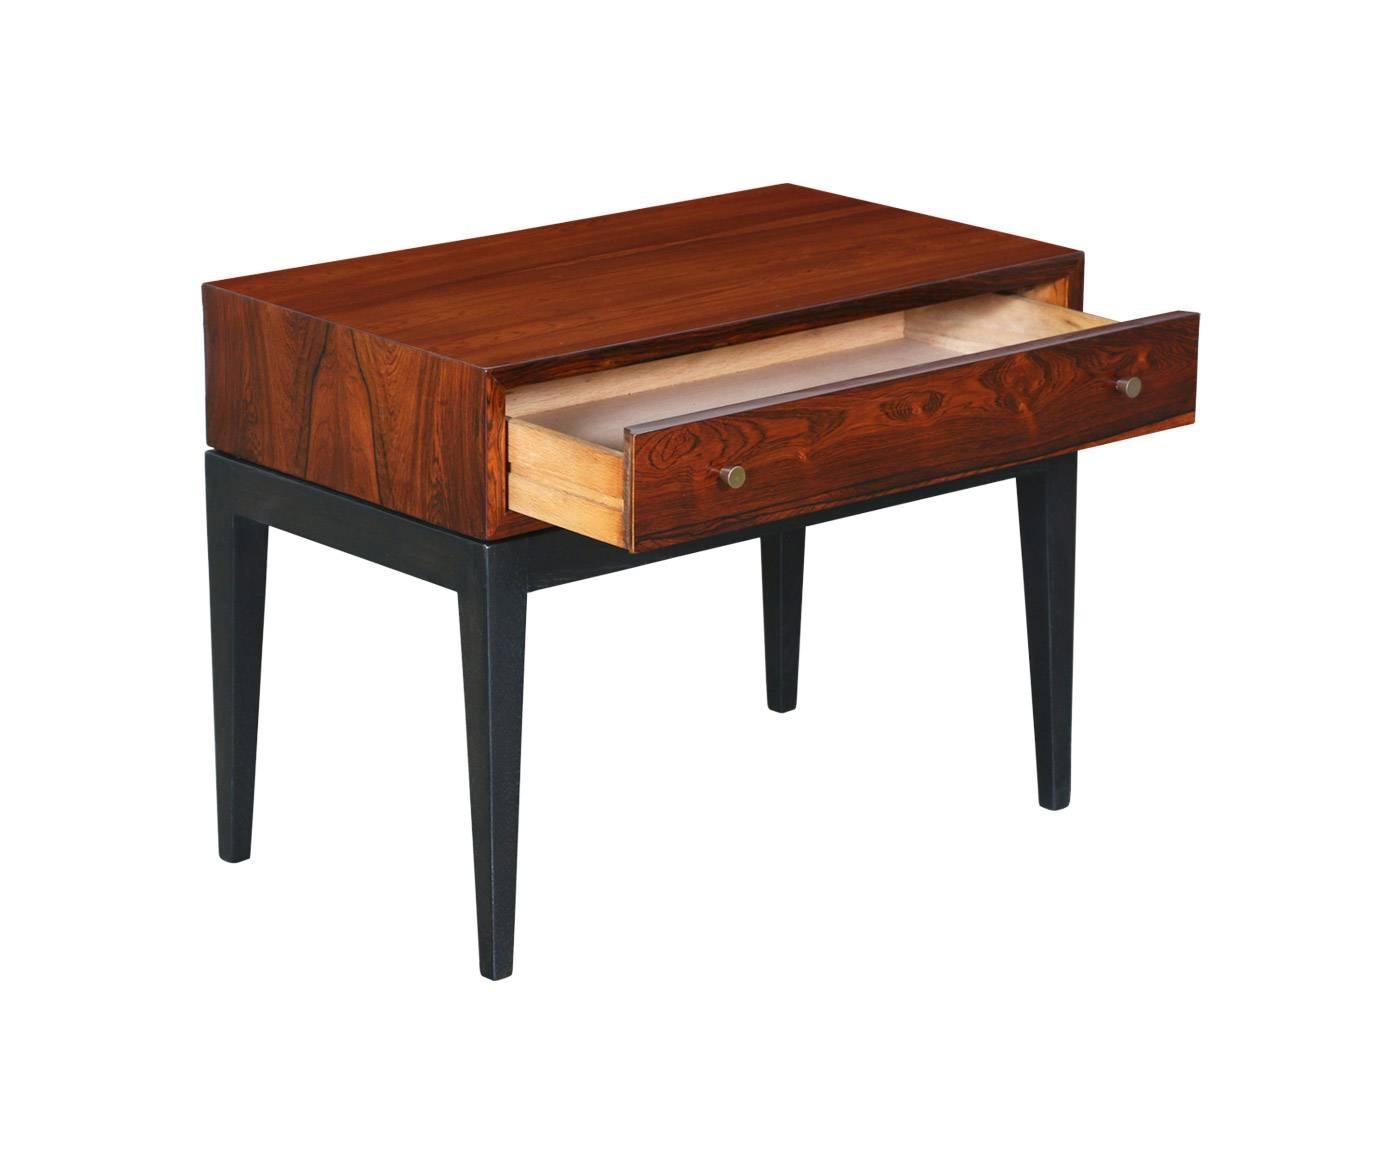 Designer: Harvey Probber.
Manufacturer: Harvey Probber.
Period/Style: Mid-Century Modern.
Country: United States.
Date: 1950s.

Dimensions: 21